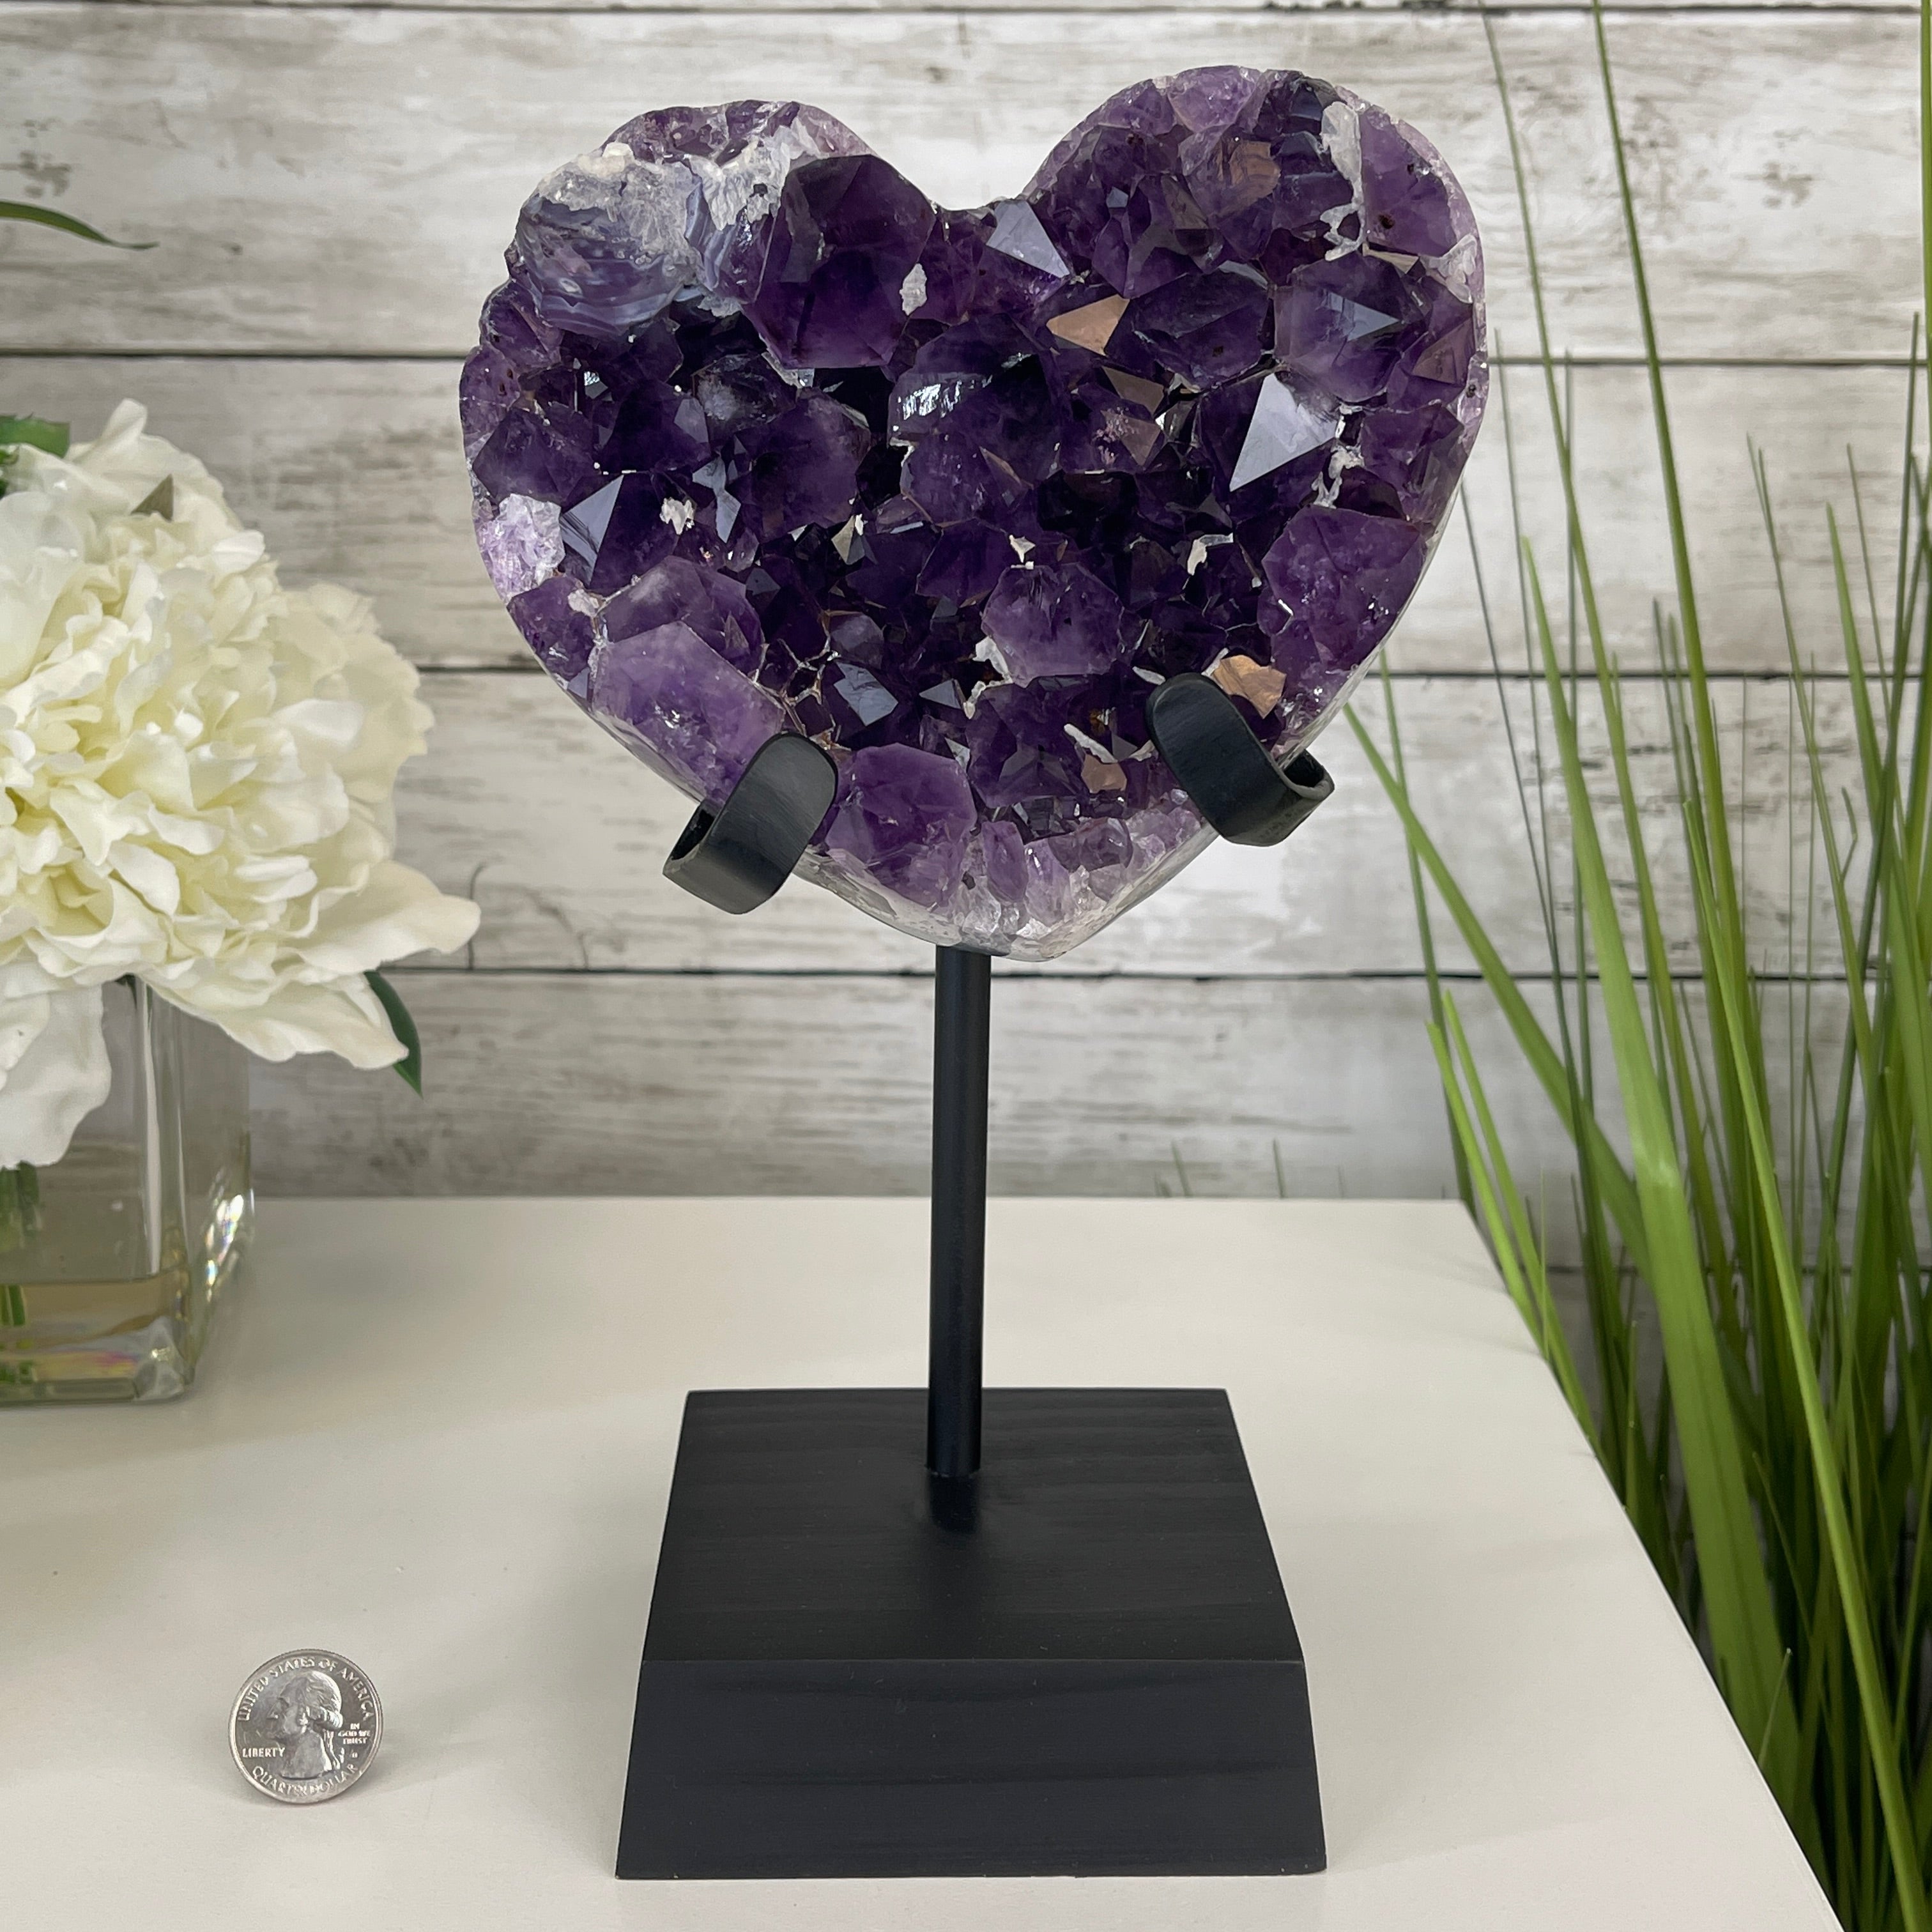 Heart-shaped amethyst geode positioned on a stand